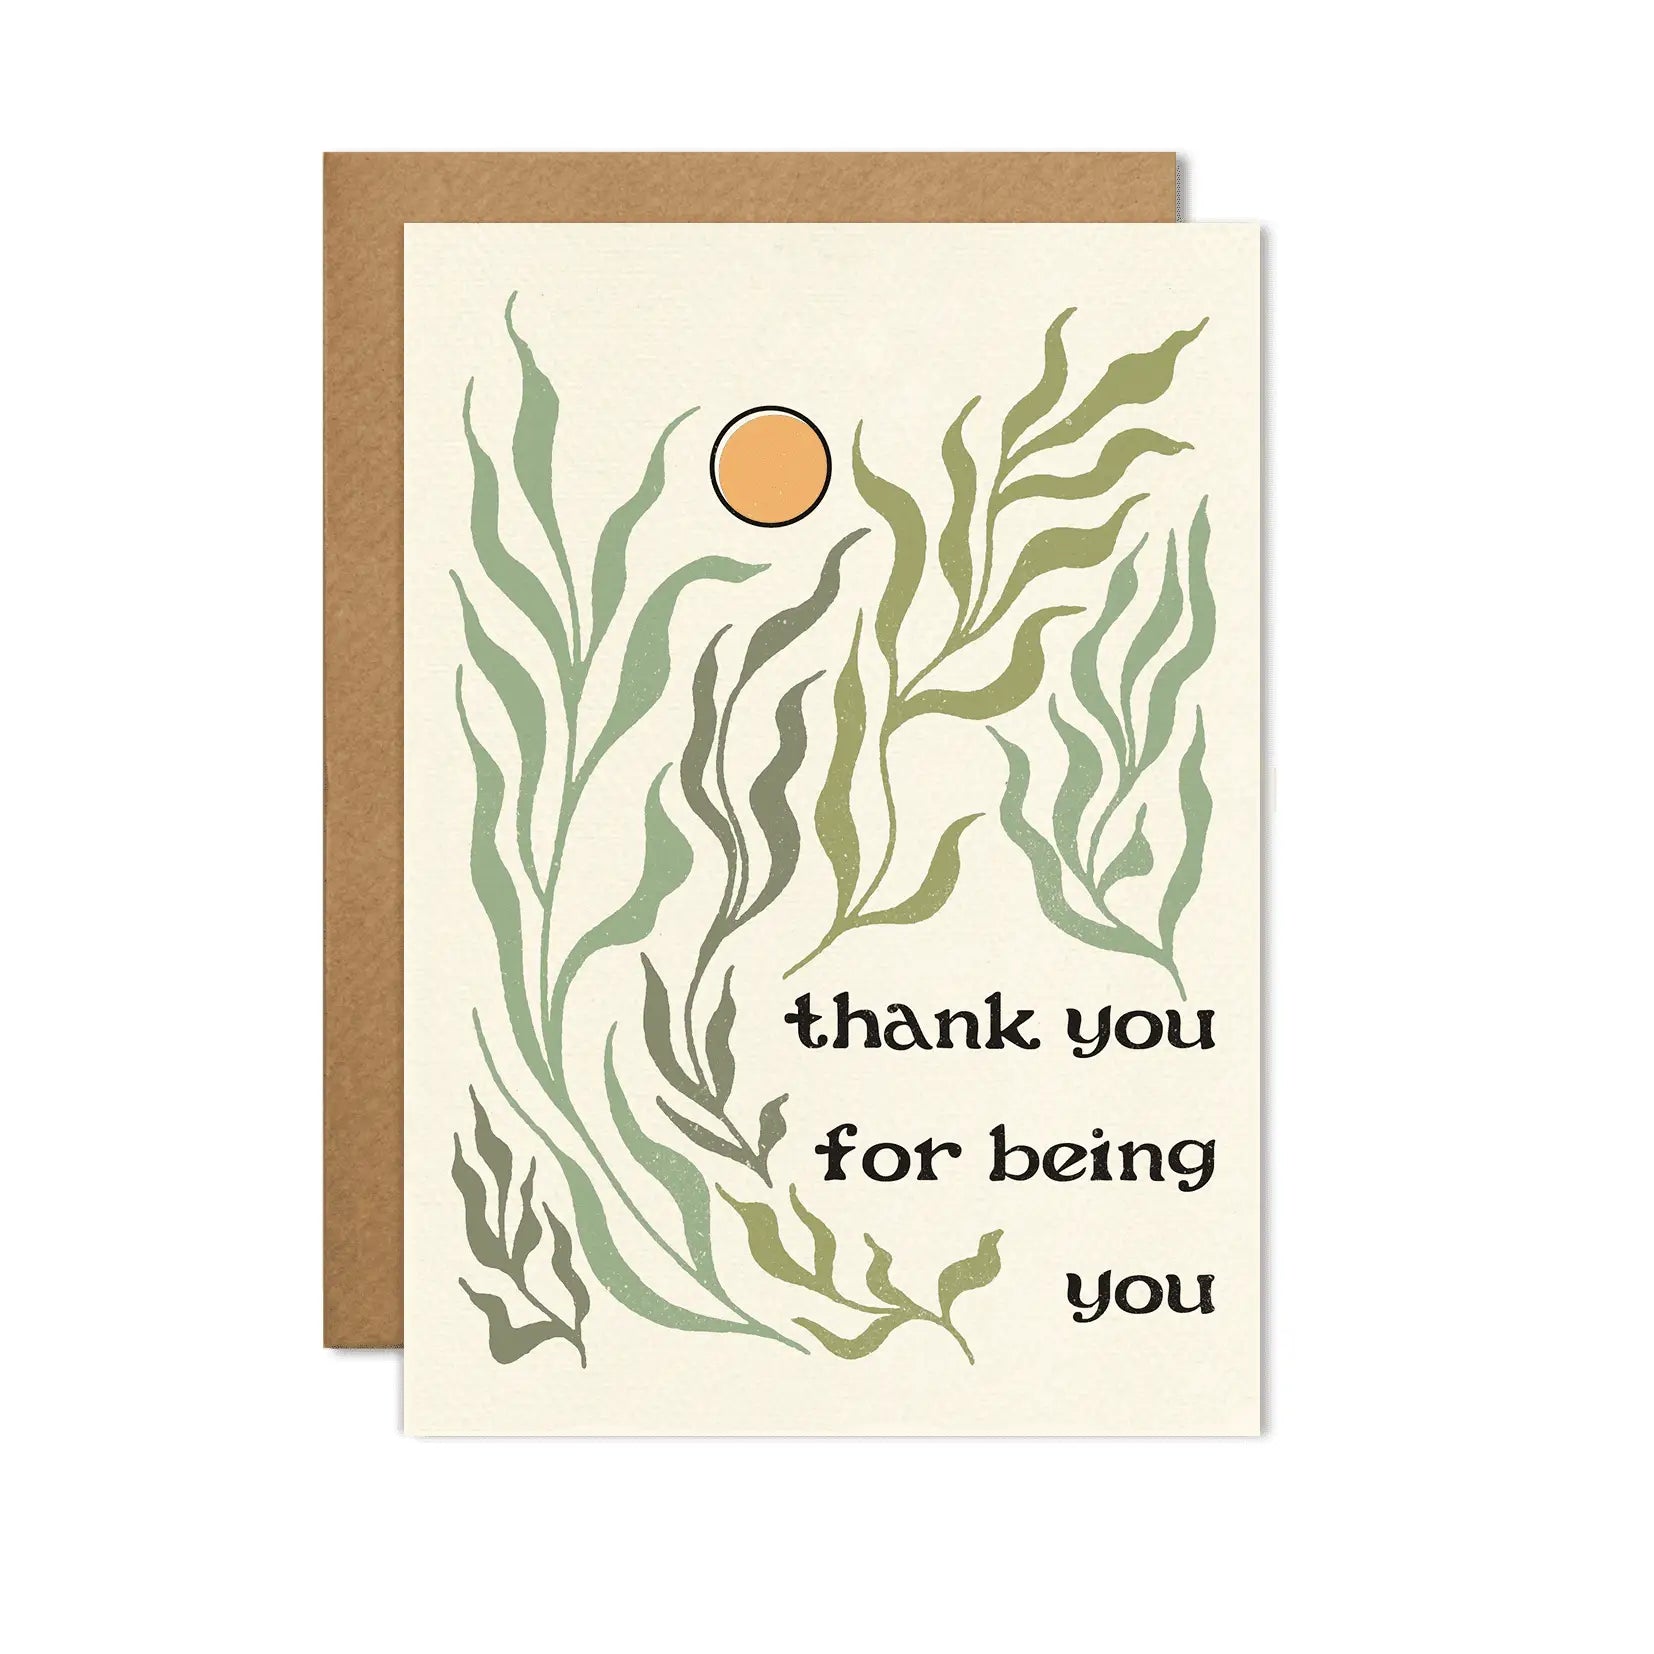 Cai & Jo “Thank You for Being You” Card